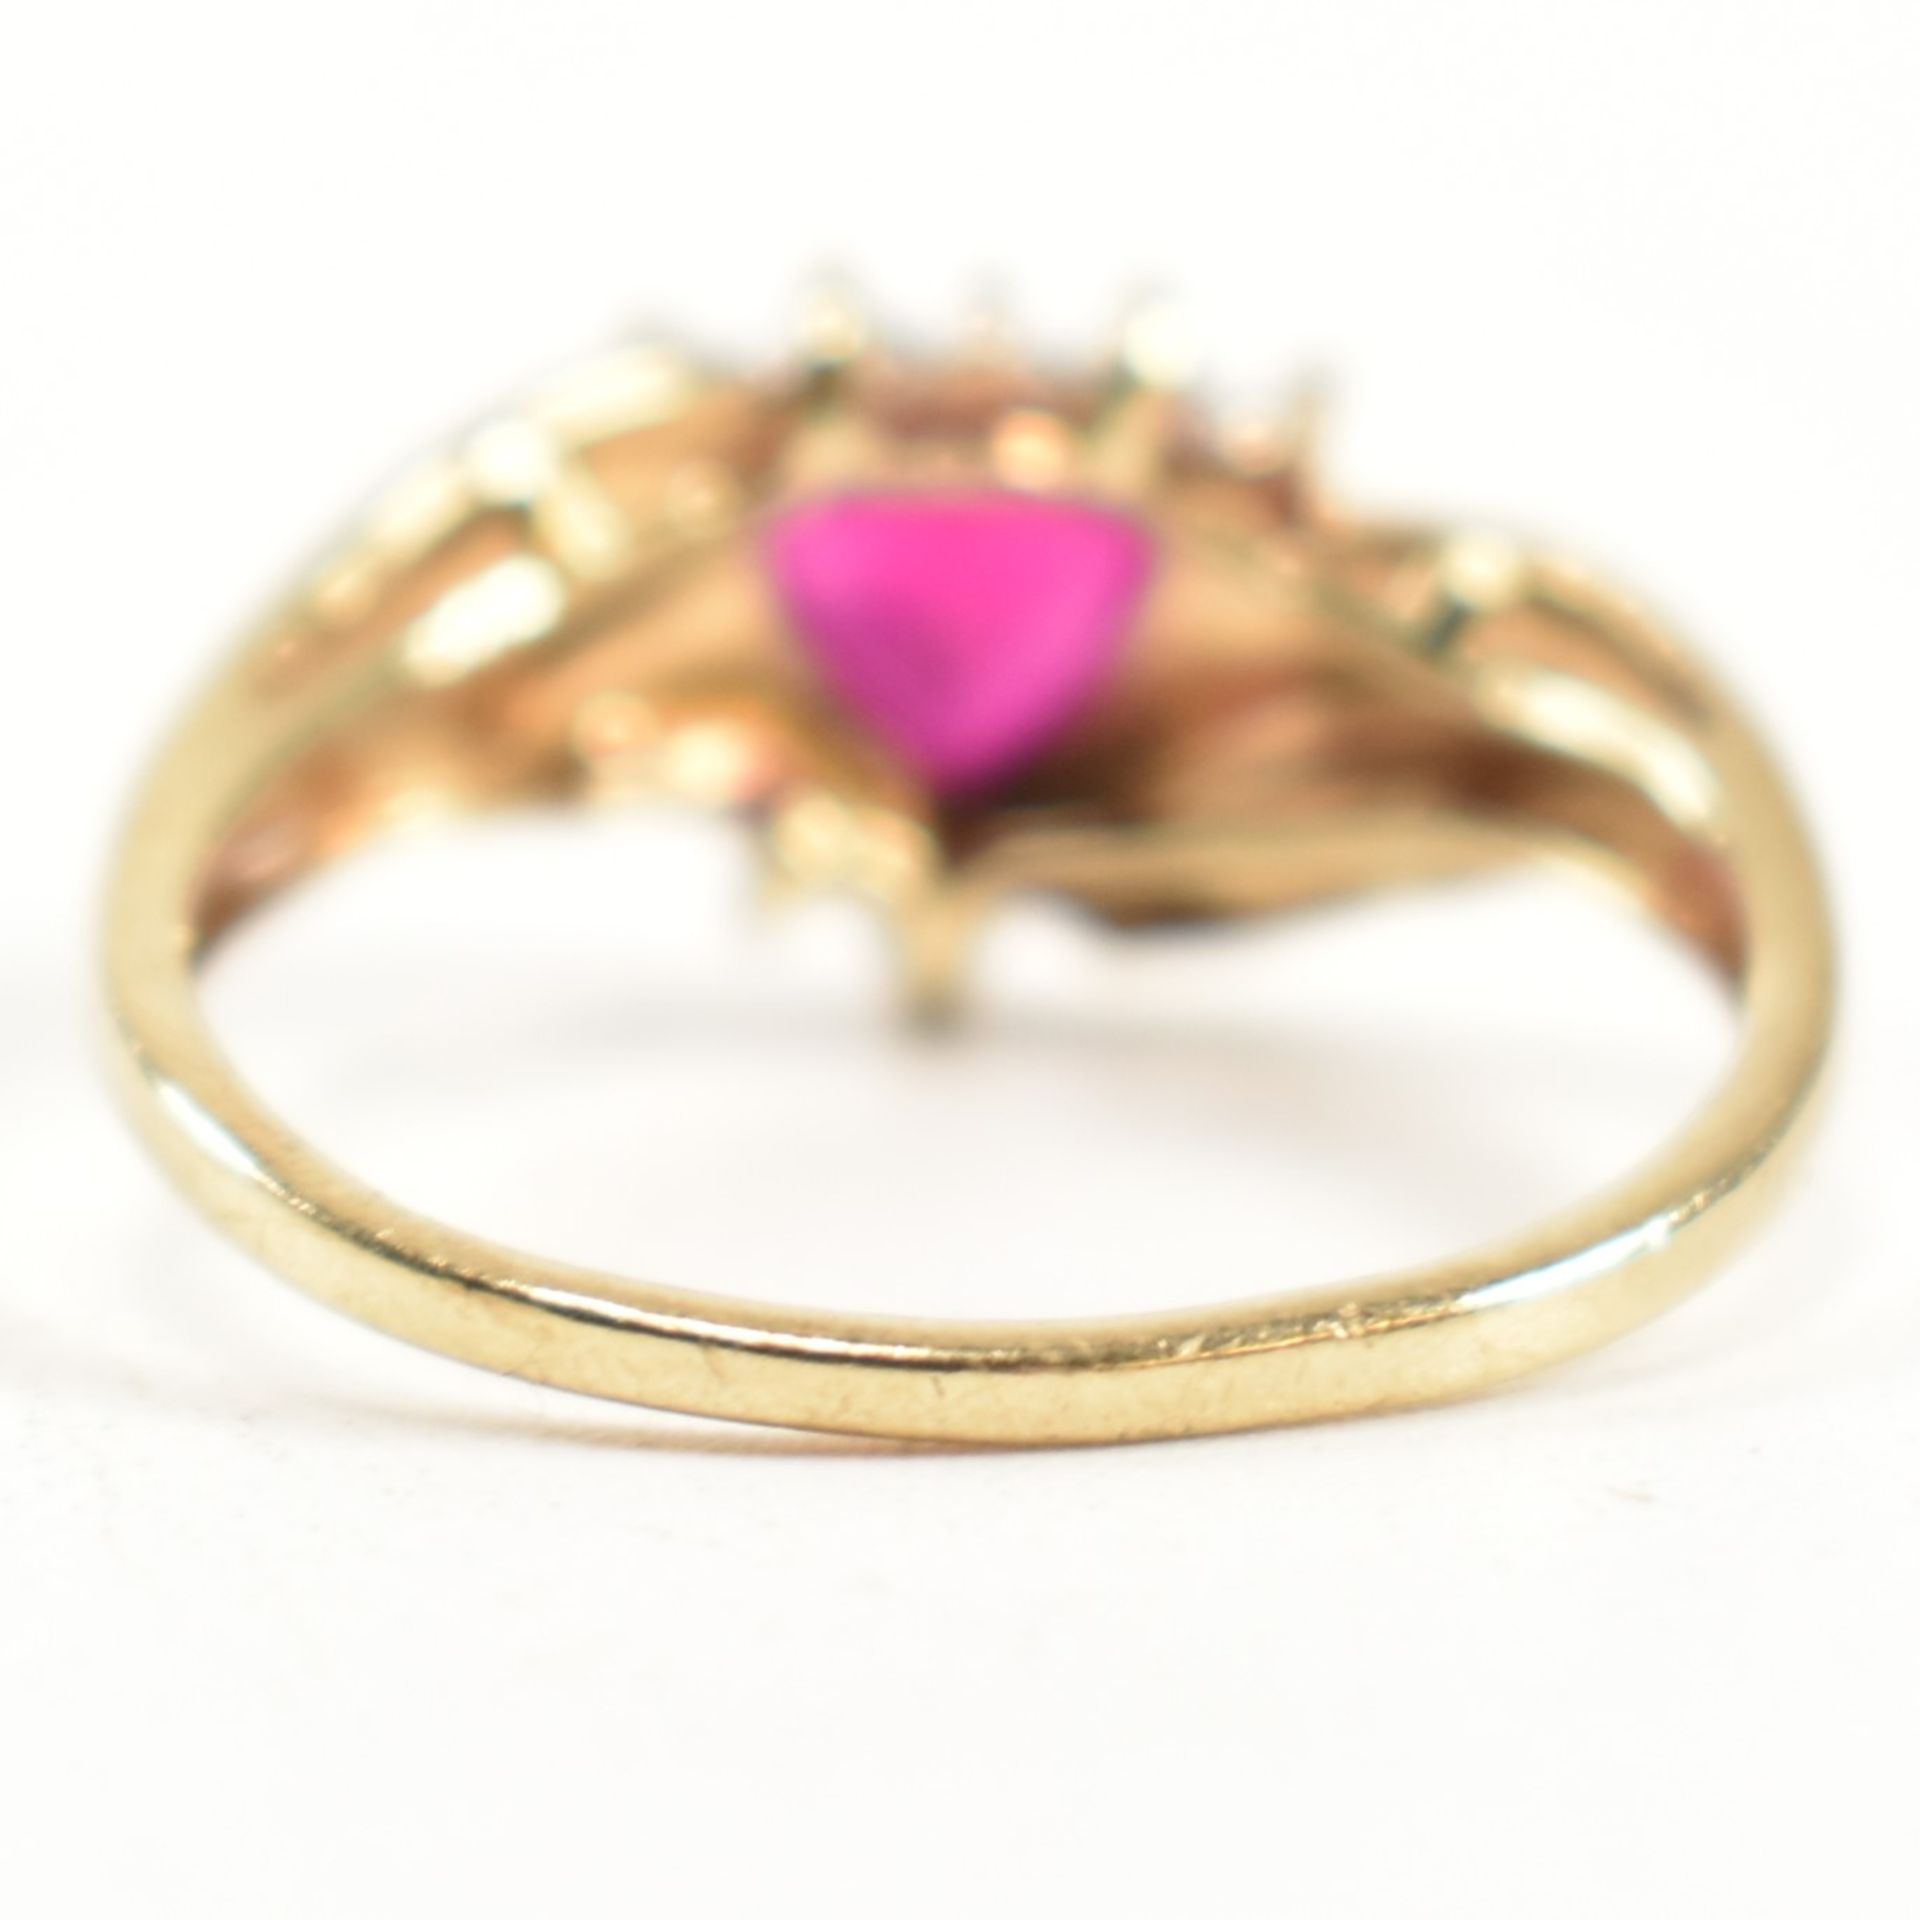 HALLMARKED 9CT GOLD DIAMOND & RUBY CLUSTER RING - Image 3 of 10